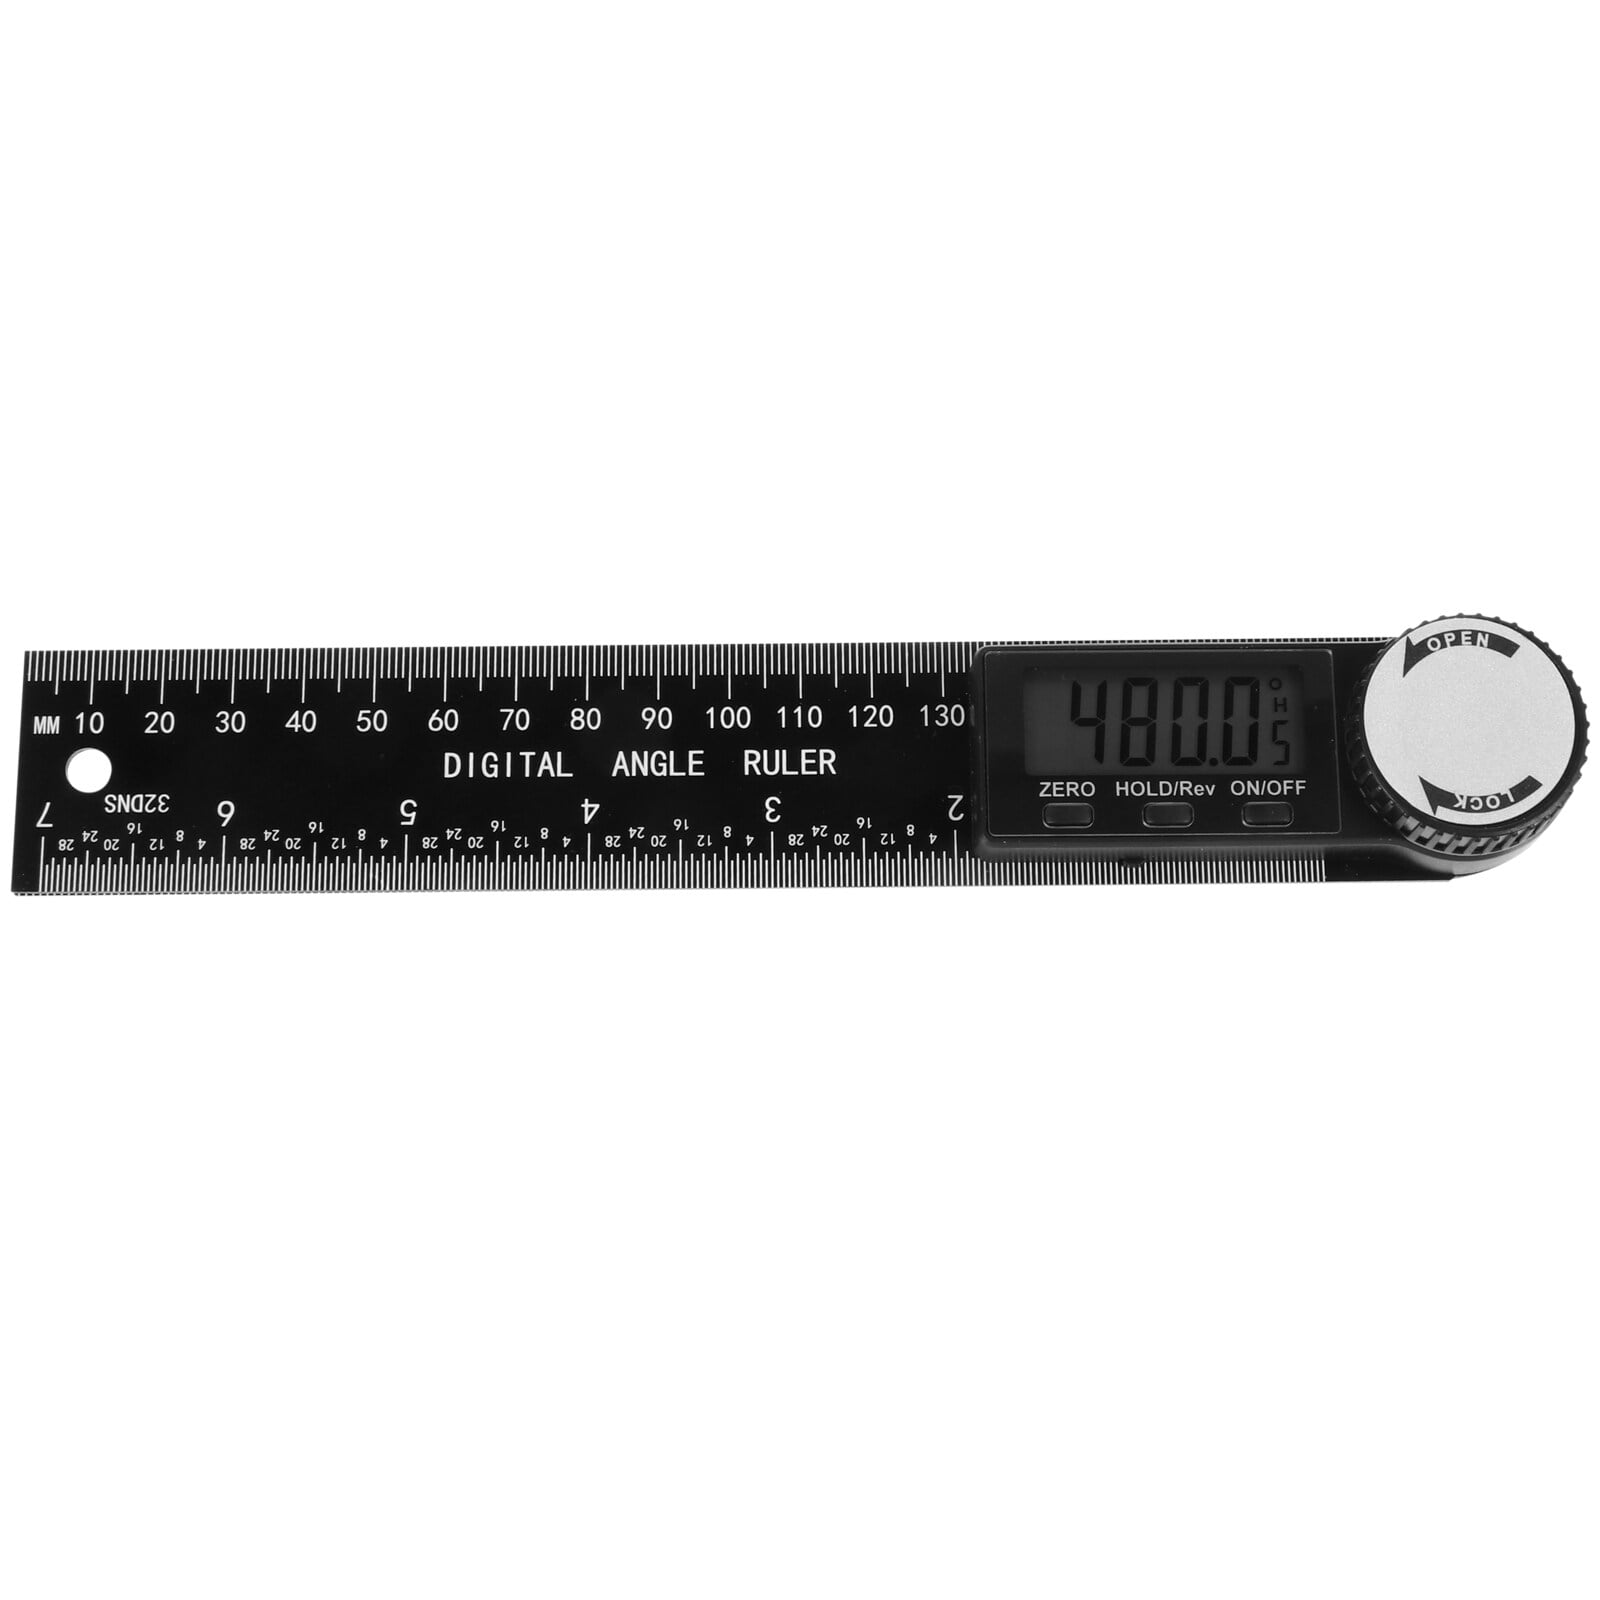 6-039R_200MM 2-in-1 Digital Protractor Electronic Angle Ruler 200mm (8